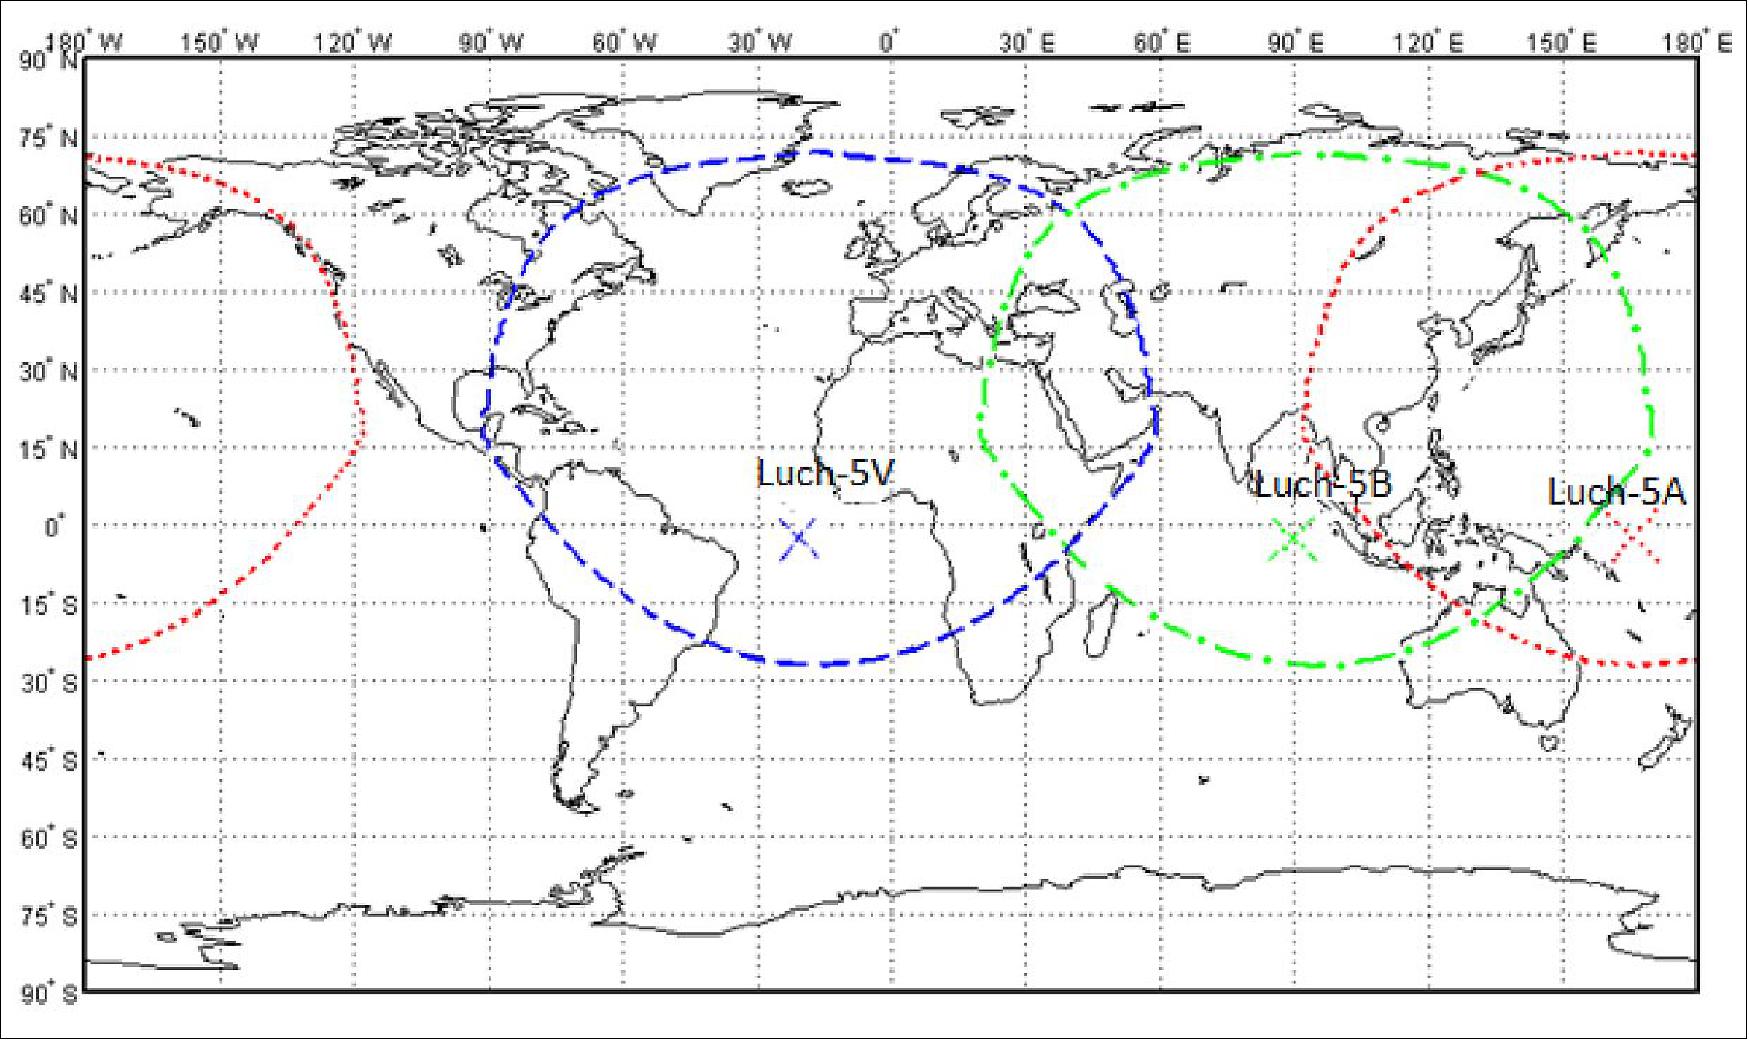 Figure 49: Estimated coverages of the SDCM geostationary satellites (image credit: RSS)